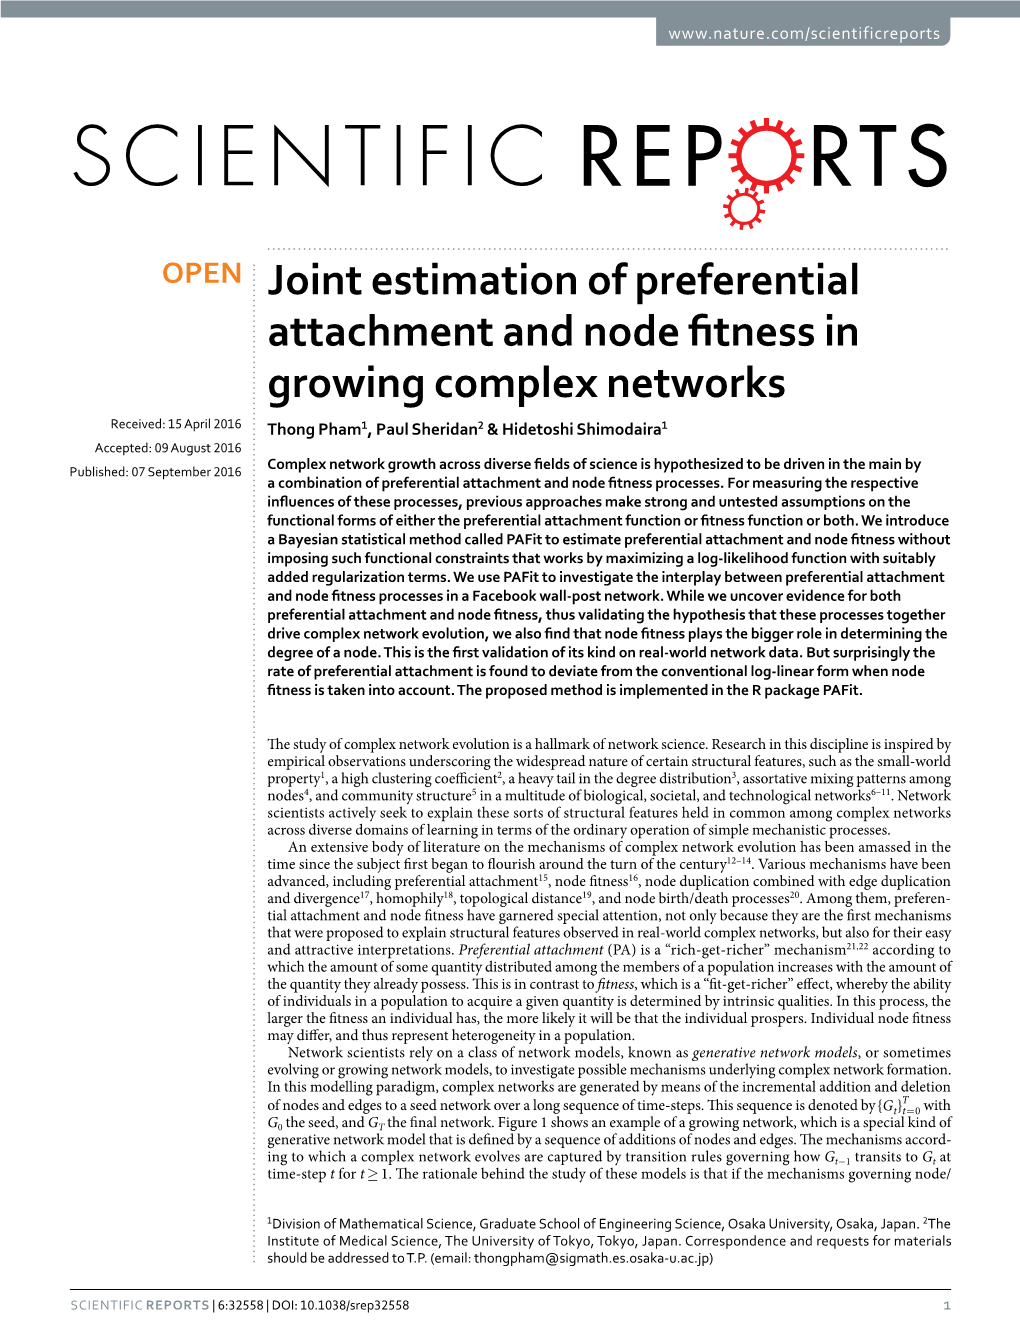 Joint Estimation of Preferential Attachment and Node Fitness In